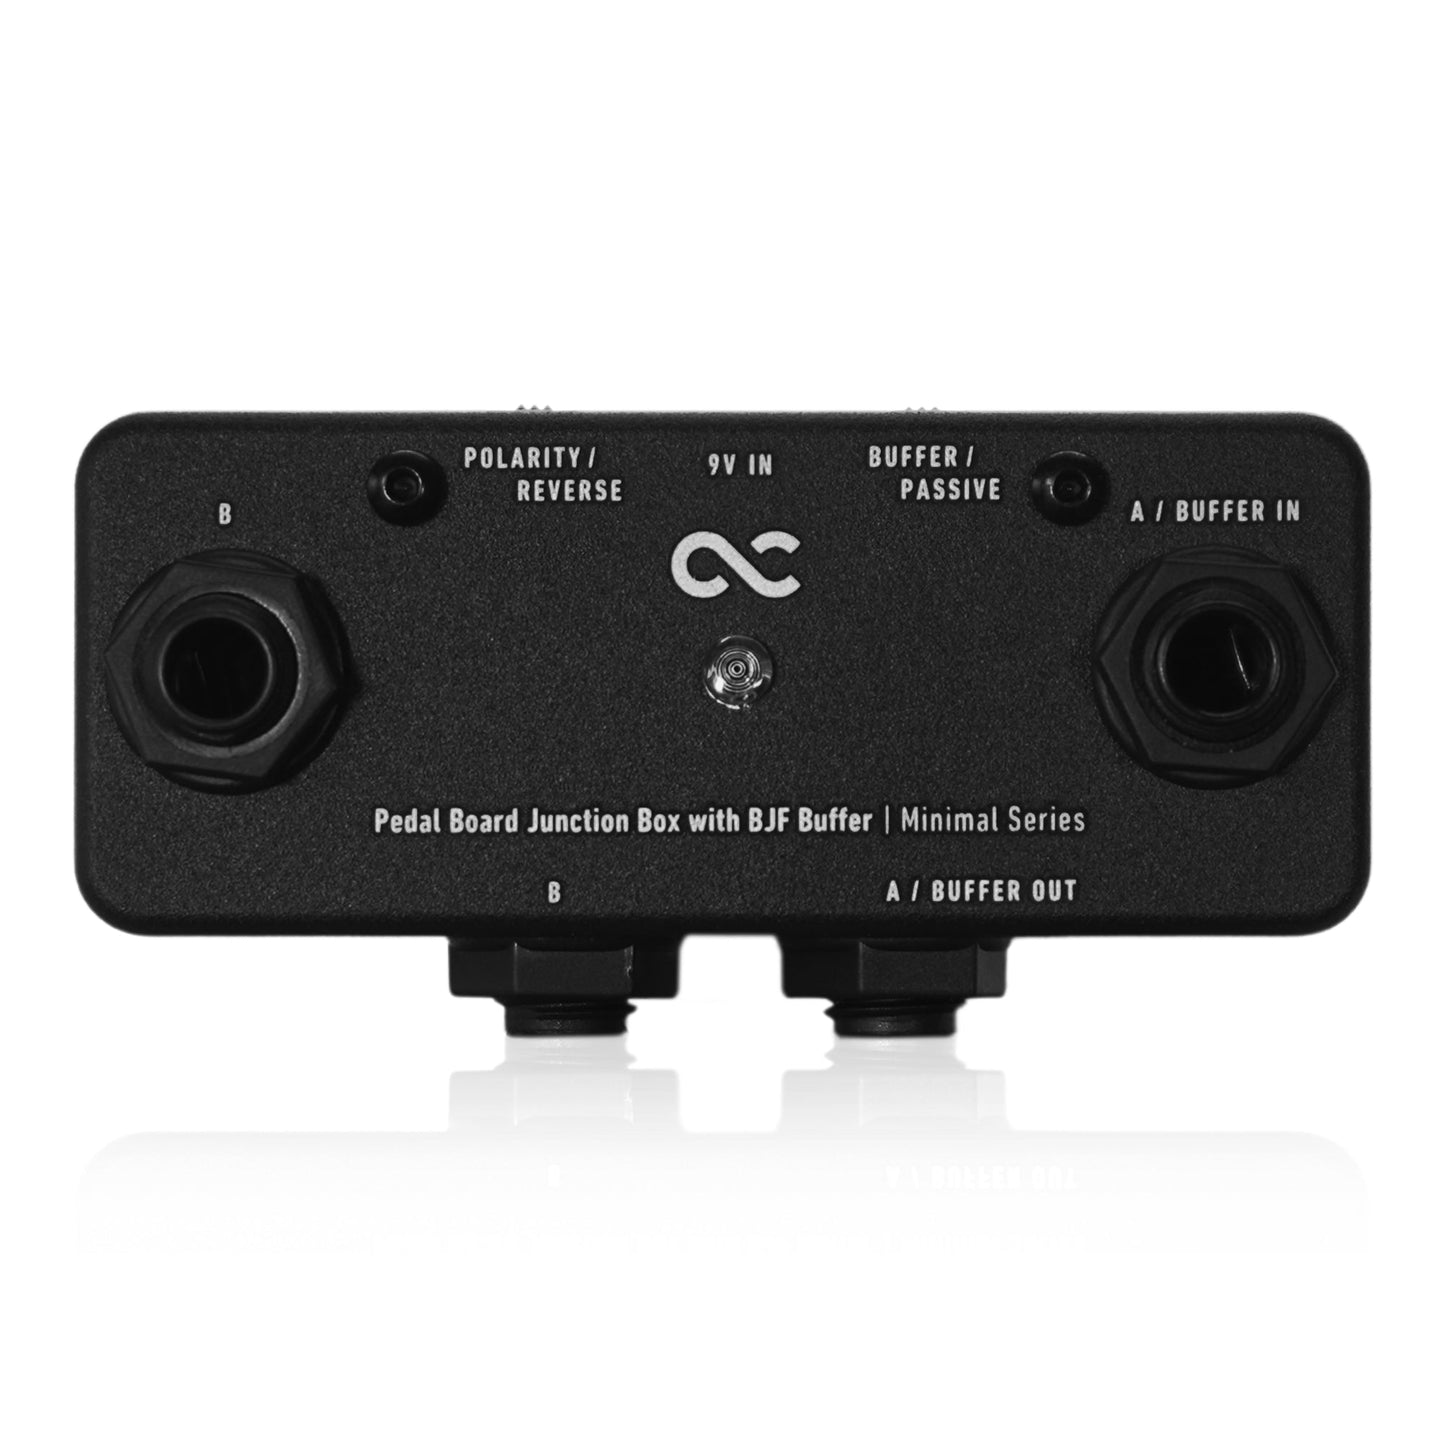 One Control/Minimal Series Pedal Board Junction Box with BJF Buffer